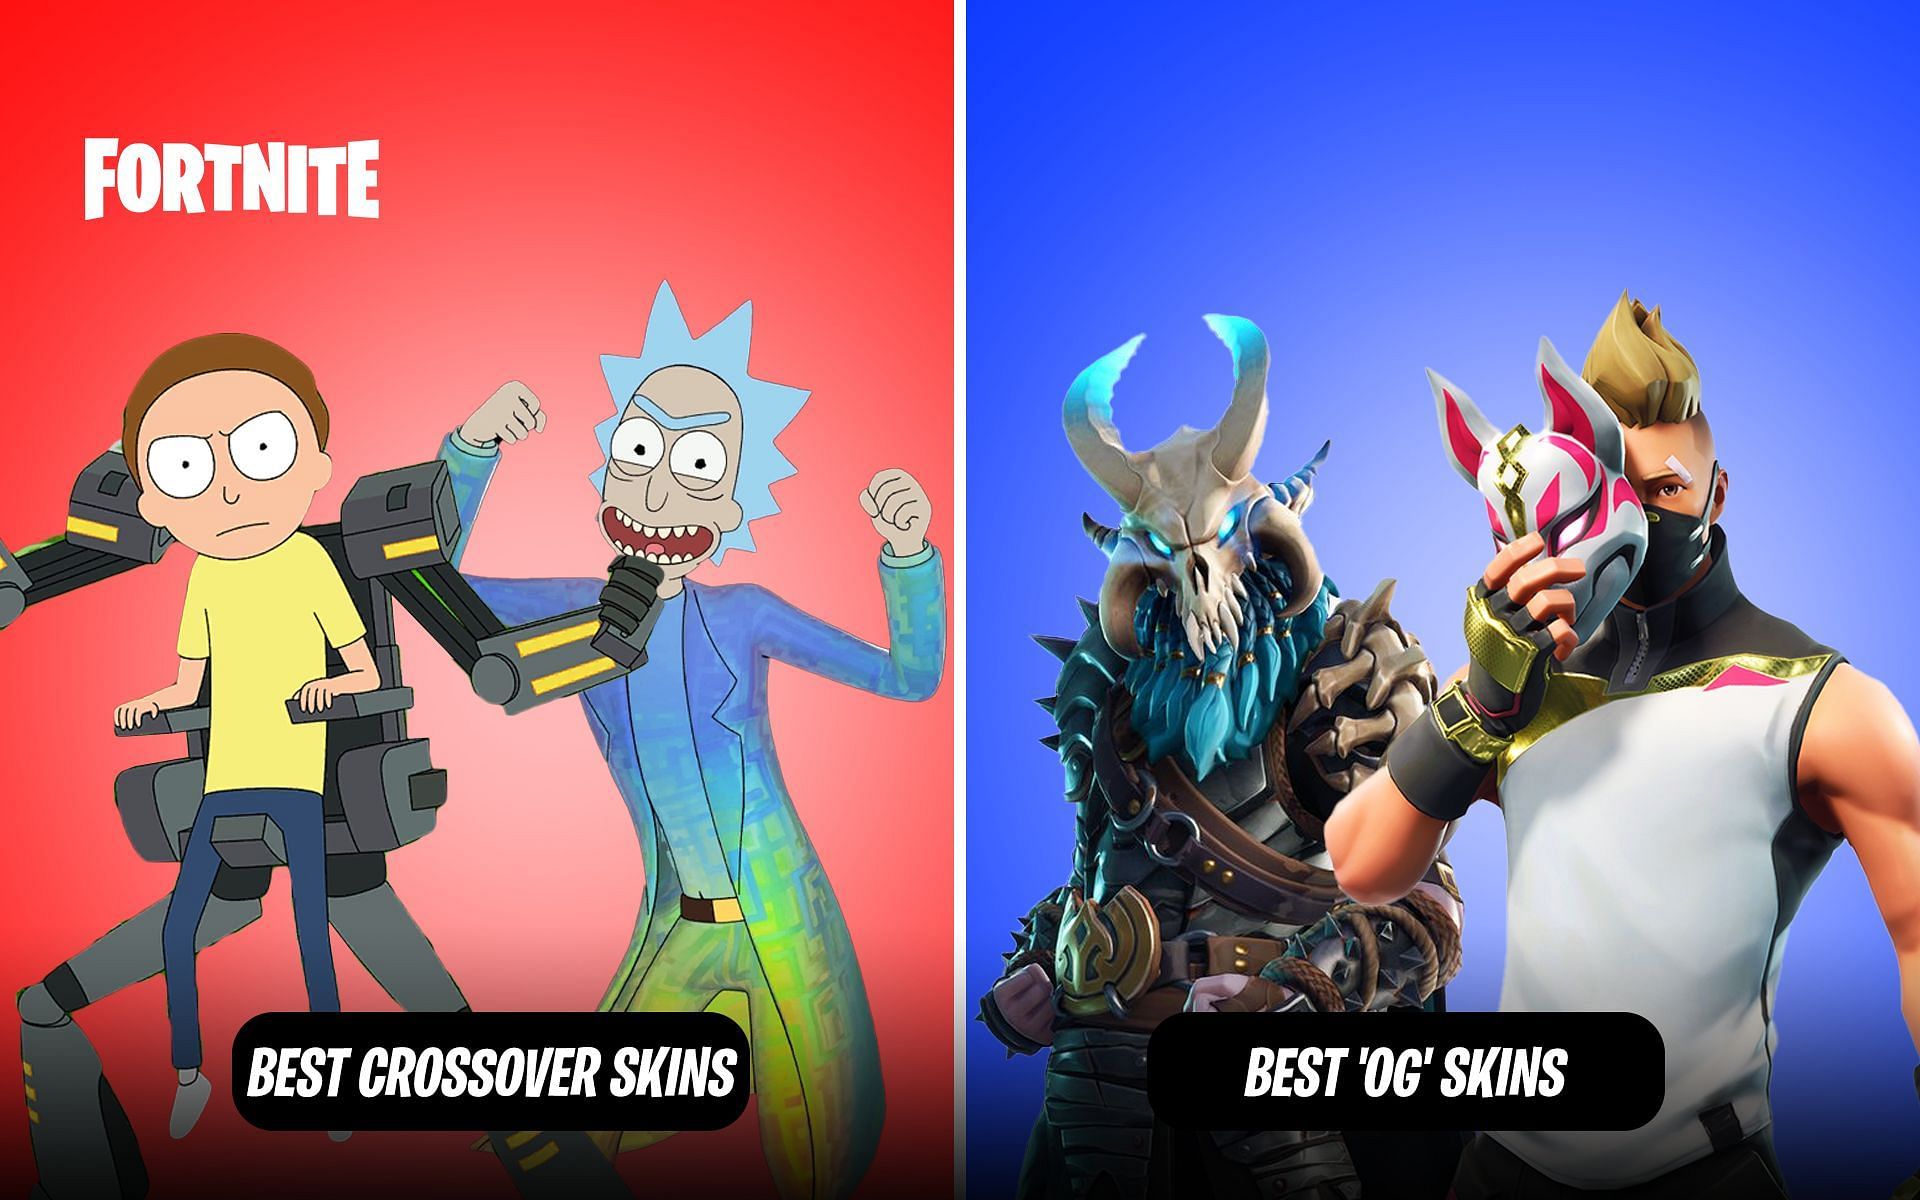 Crossovers and &#039;OG&#039; skins have a special place in the Fortnite community (Image via Sportskeeda)